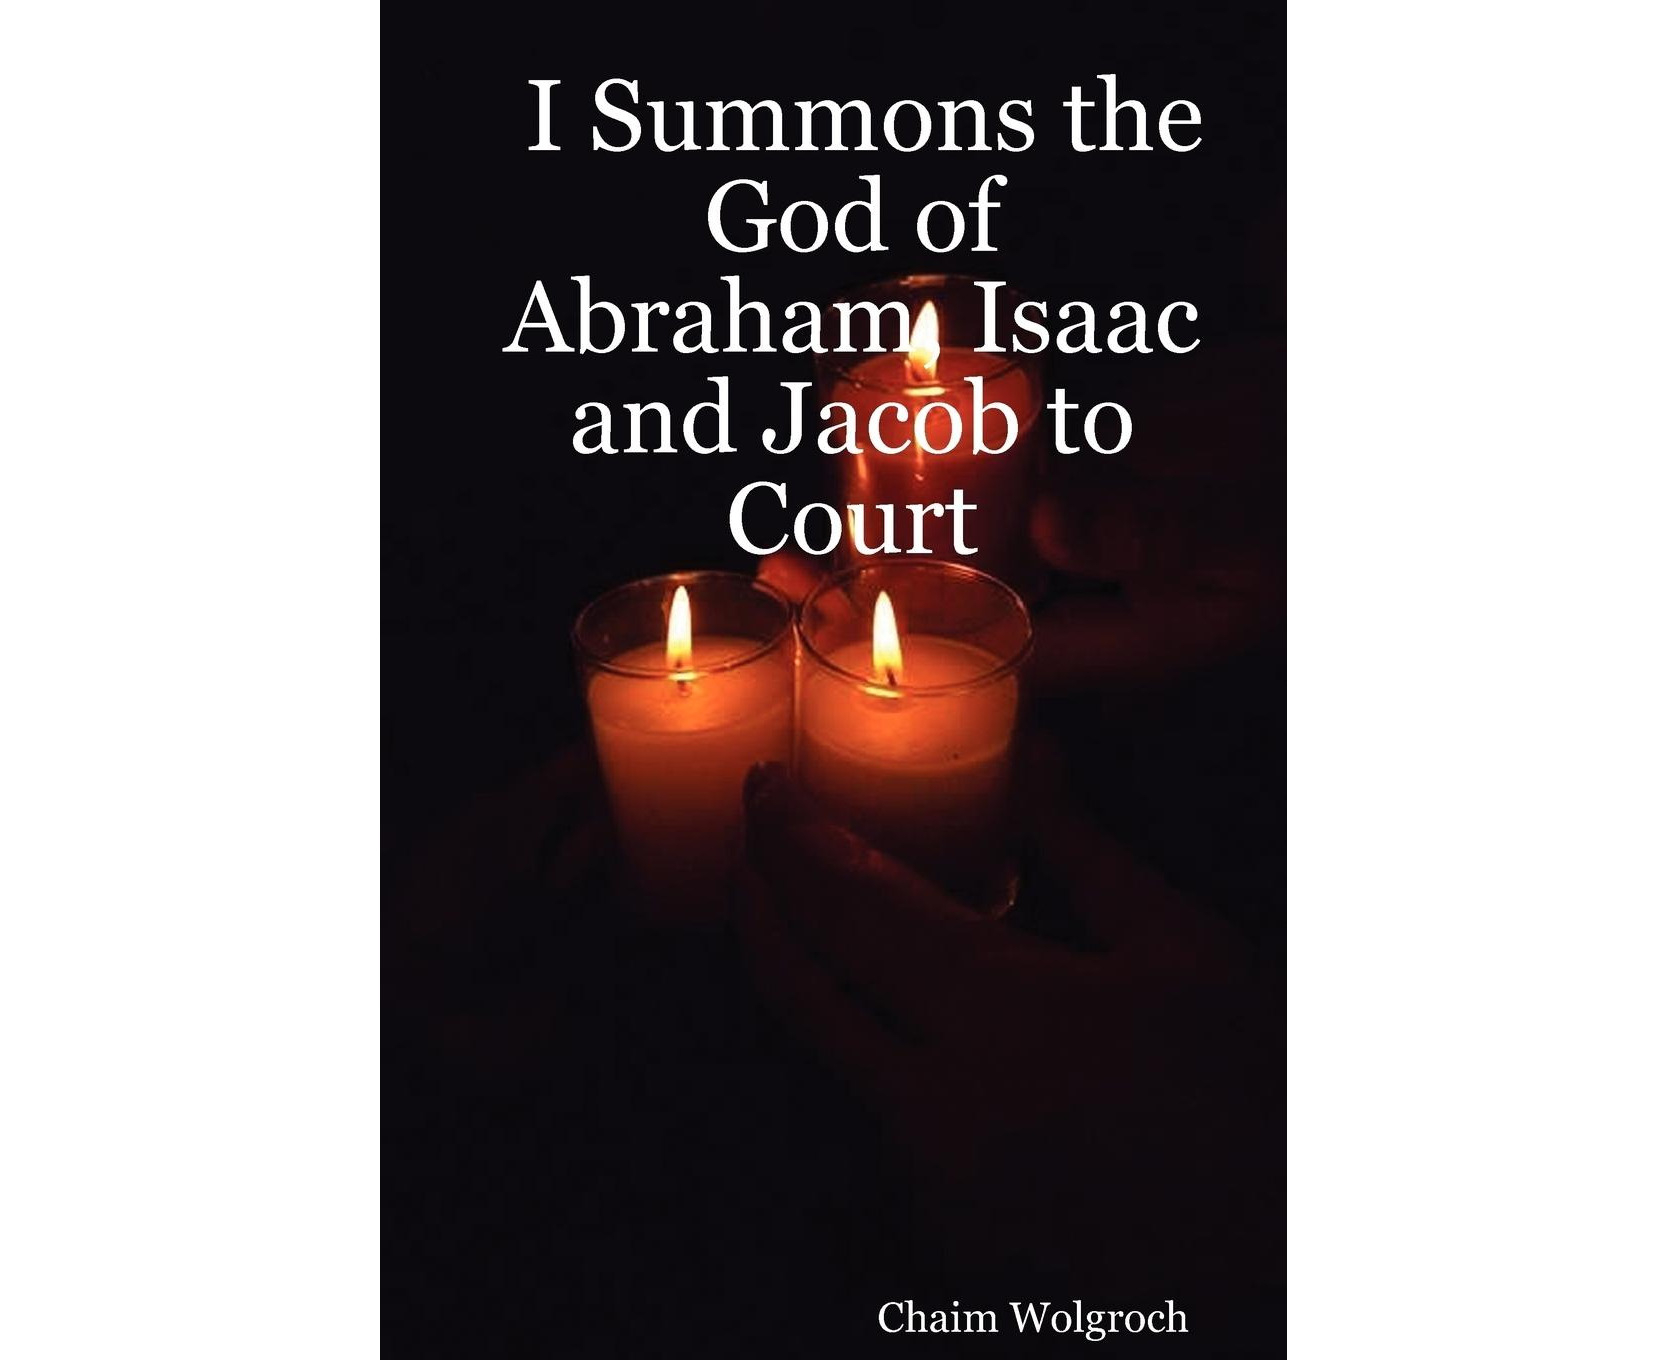 i-summons-the-god-of-abraham-isaac-and-jacob-to-court-www-catch-au